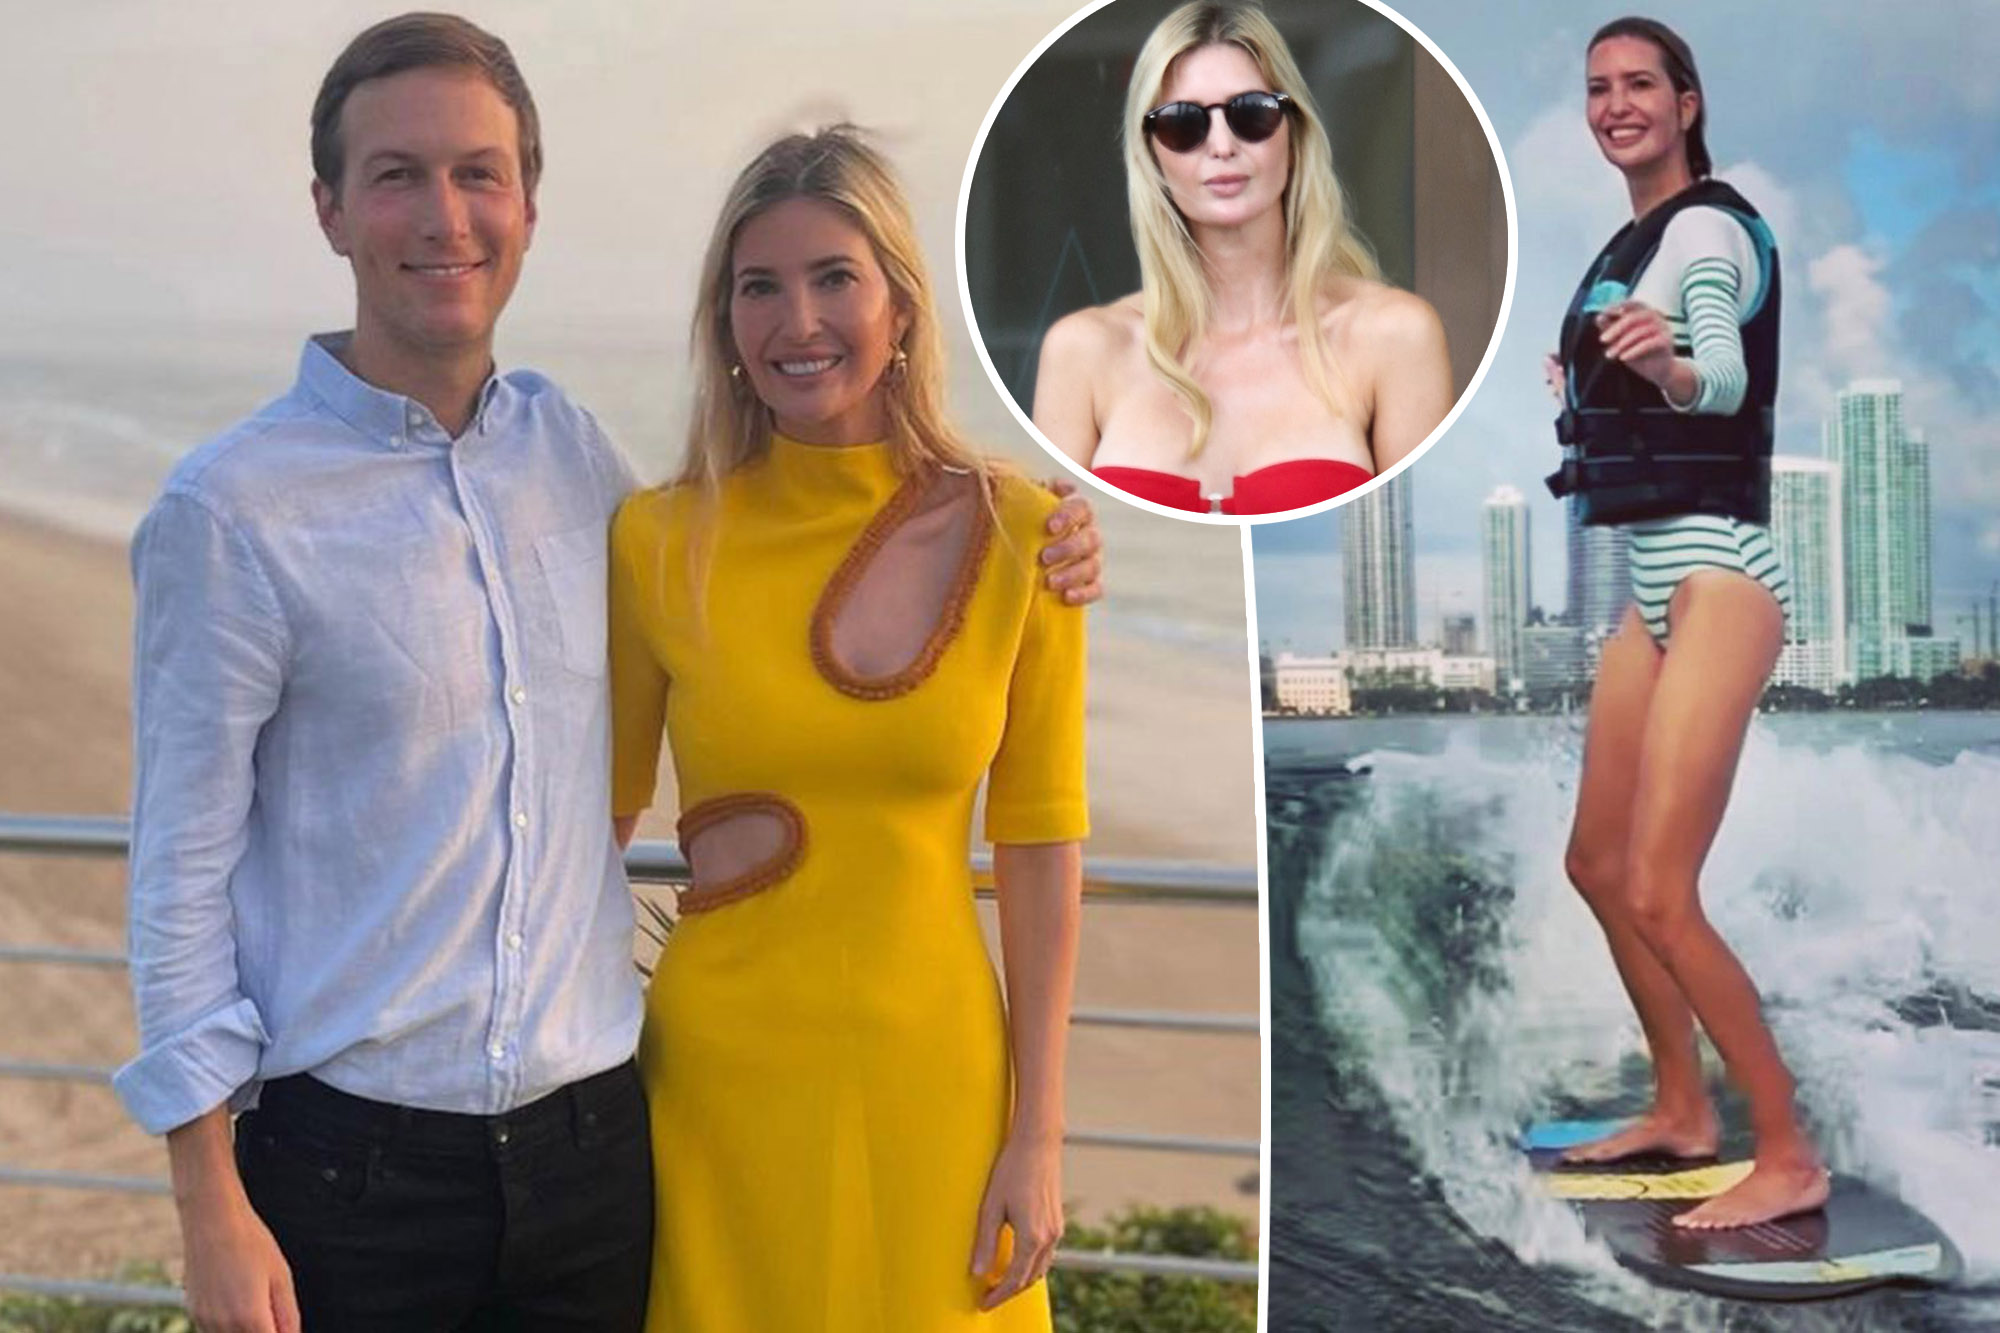 andy crespo recommends ivanka trump bathing suit pic pic